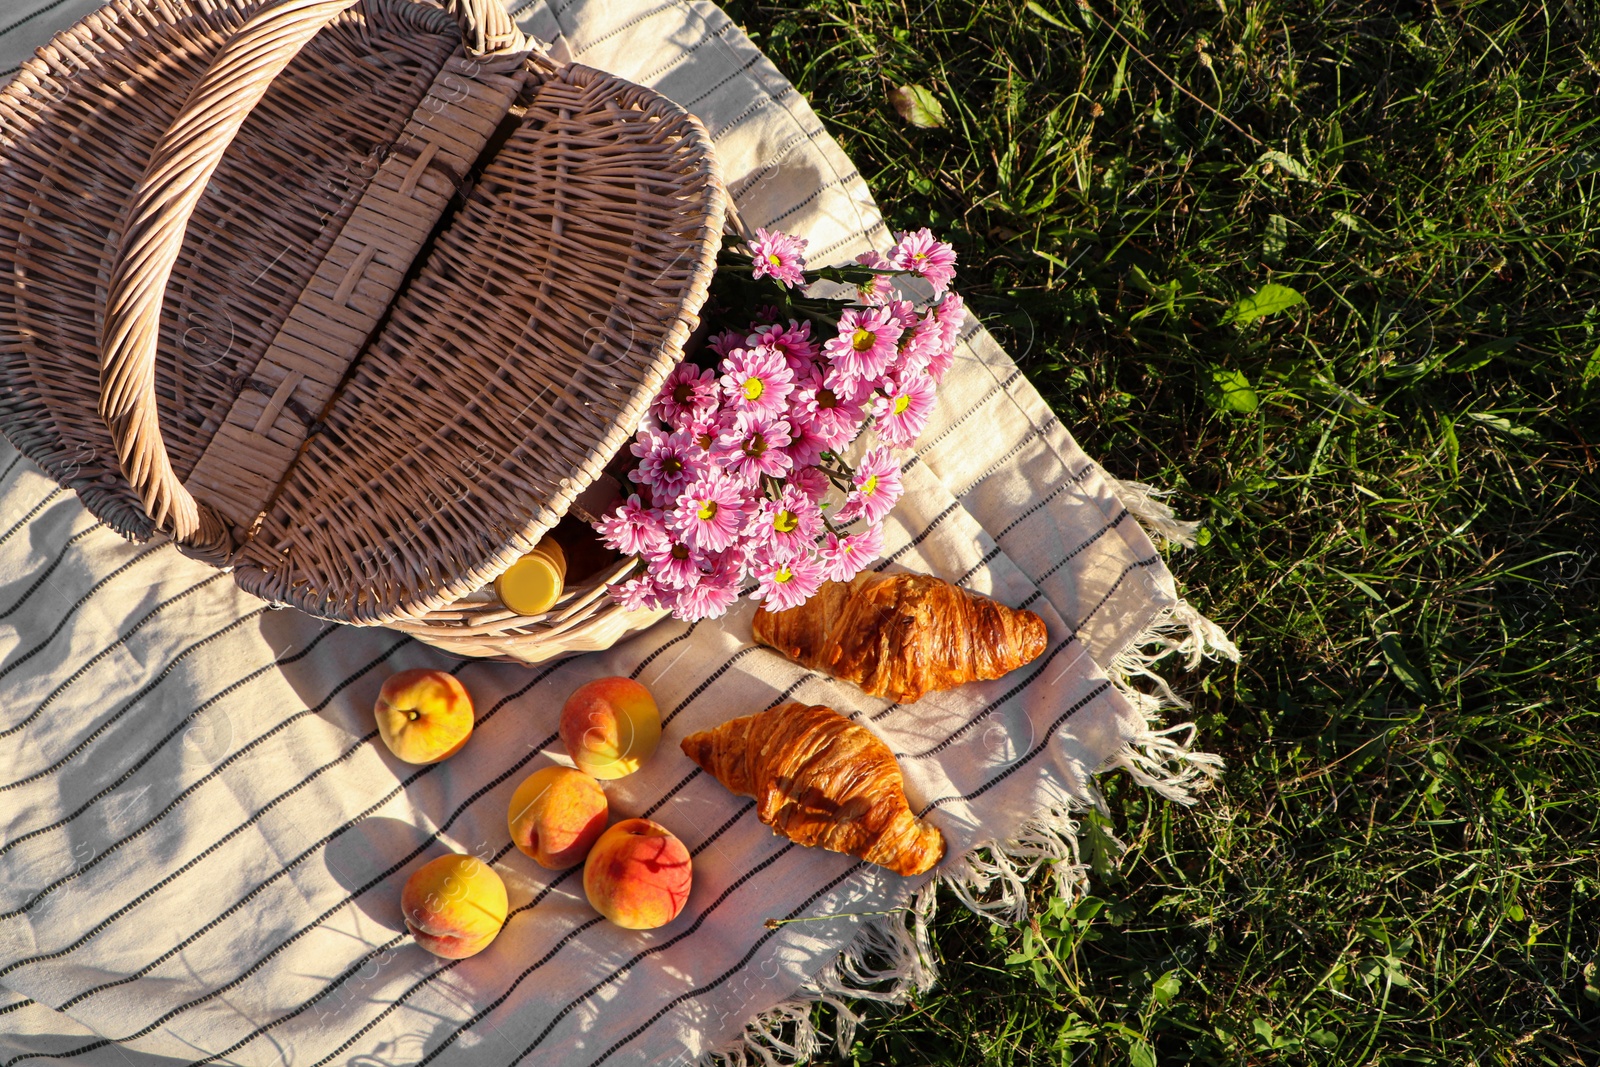 Photo of Picnic basket with flowers, bottle of wine and food on blanket outdoors, top view